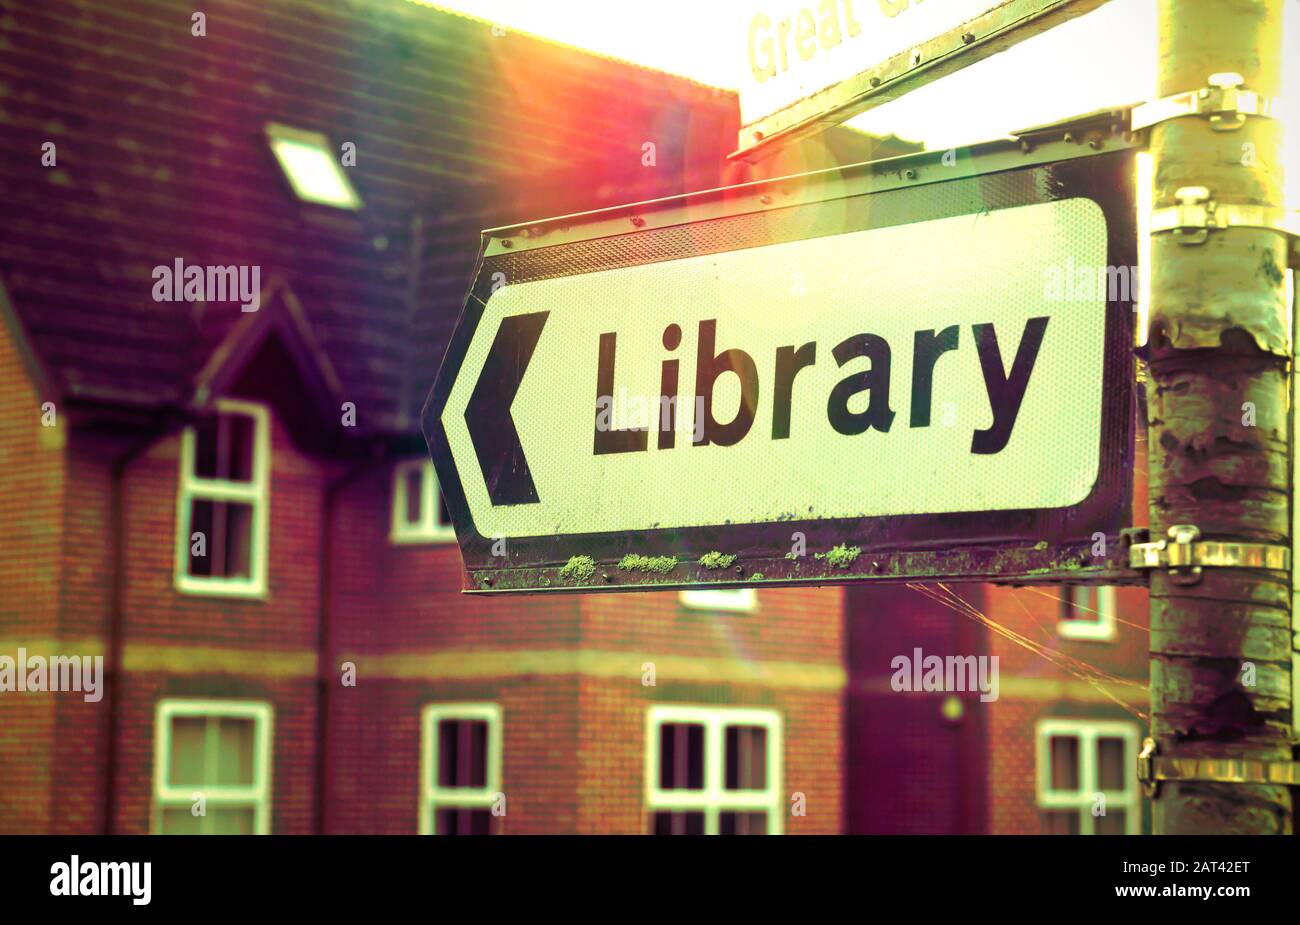 A road sign for a library in the UK Stock Photo